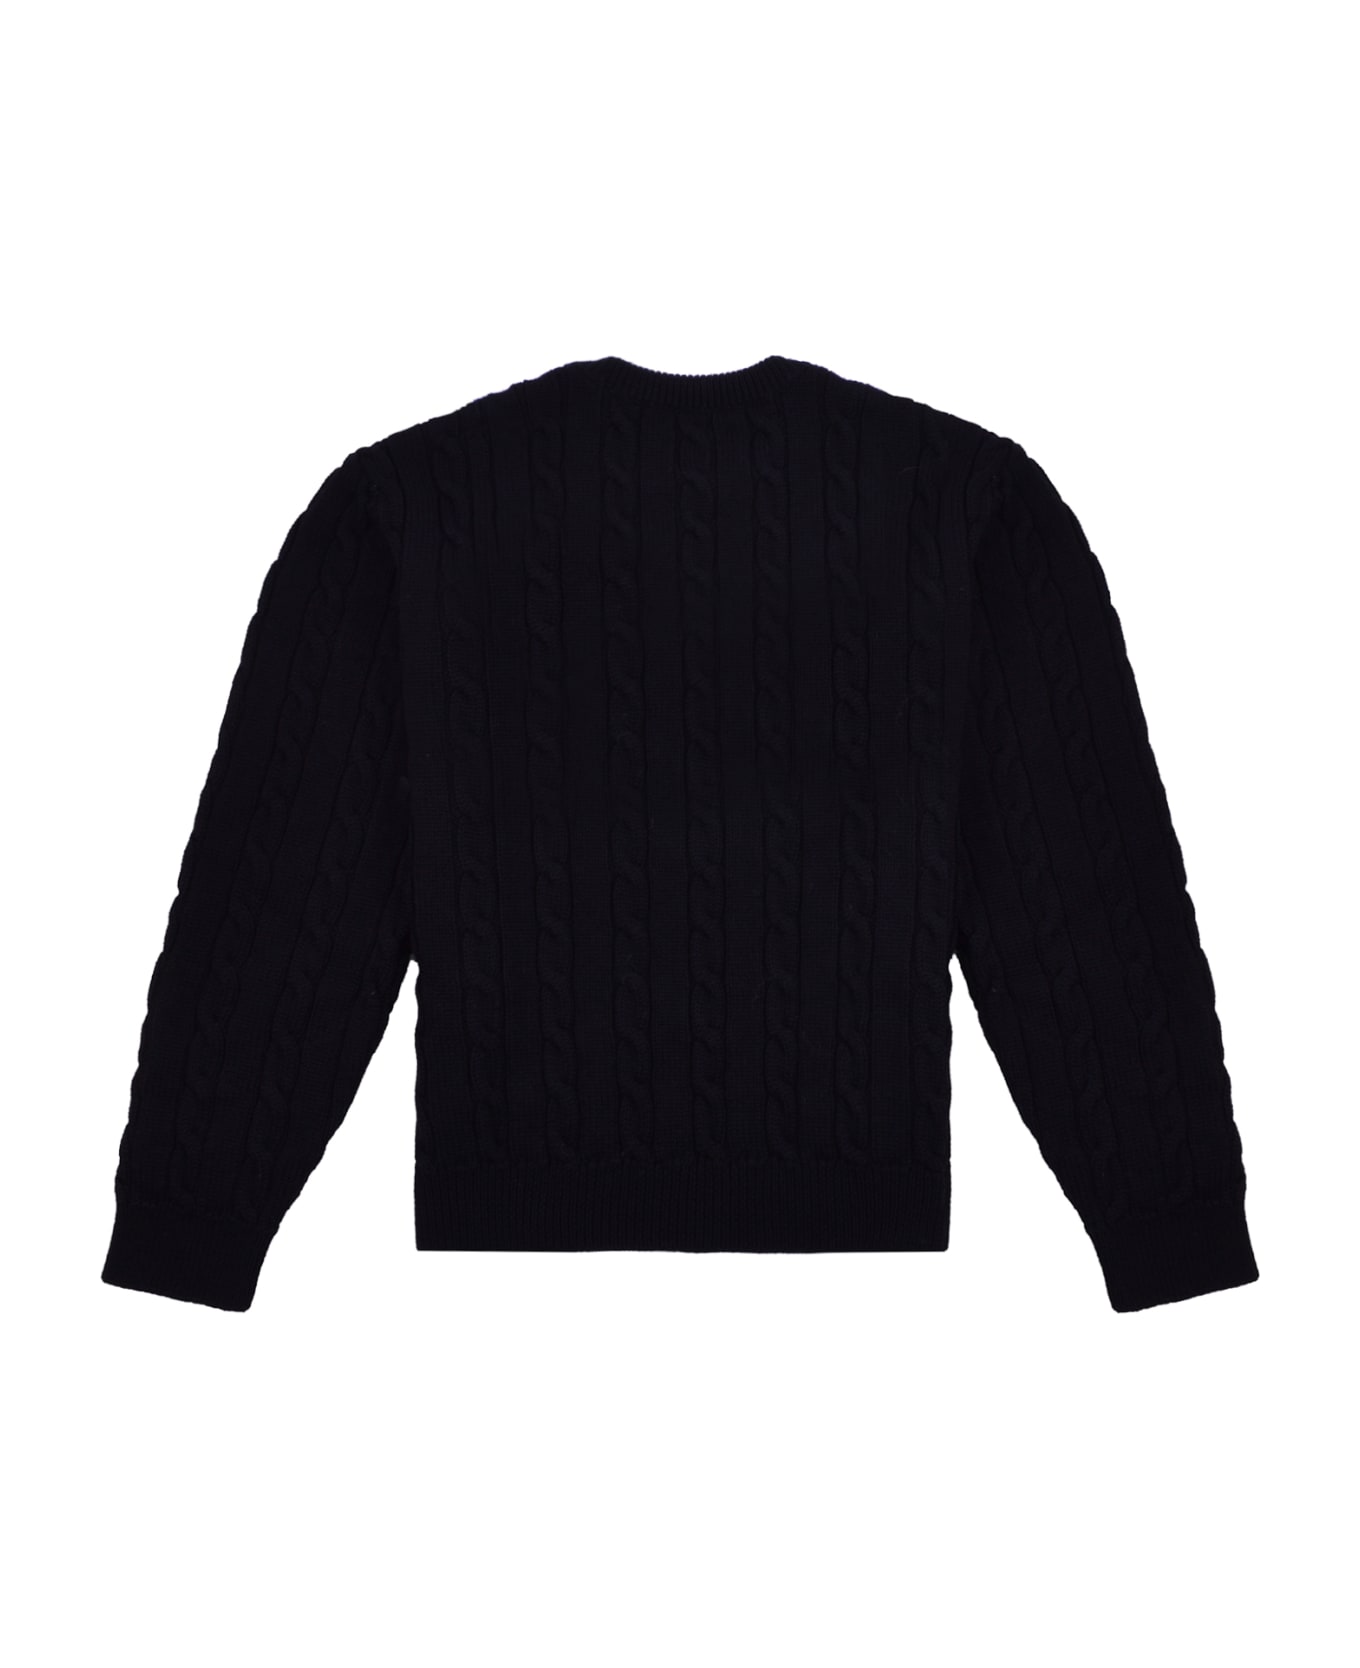 Off-White Wool Sweater - Back